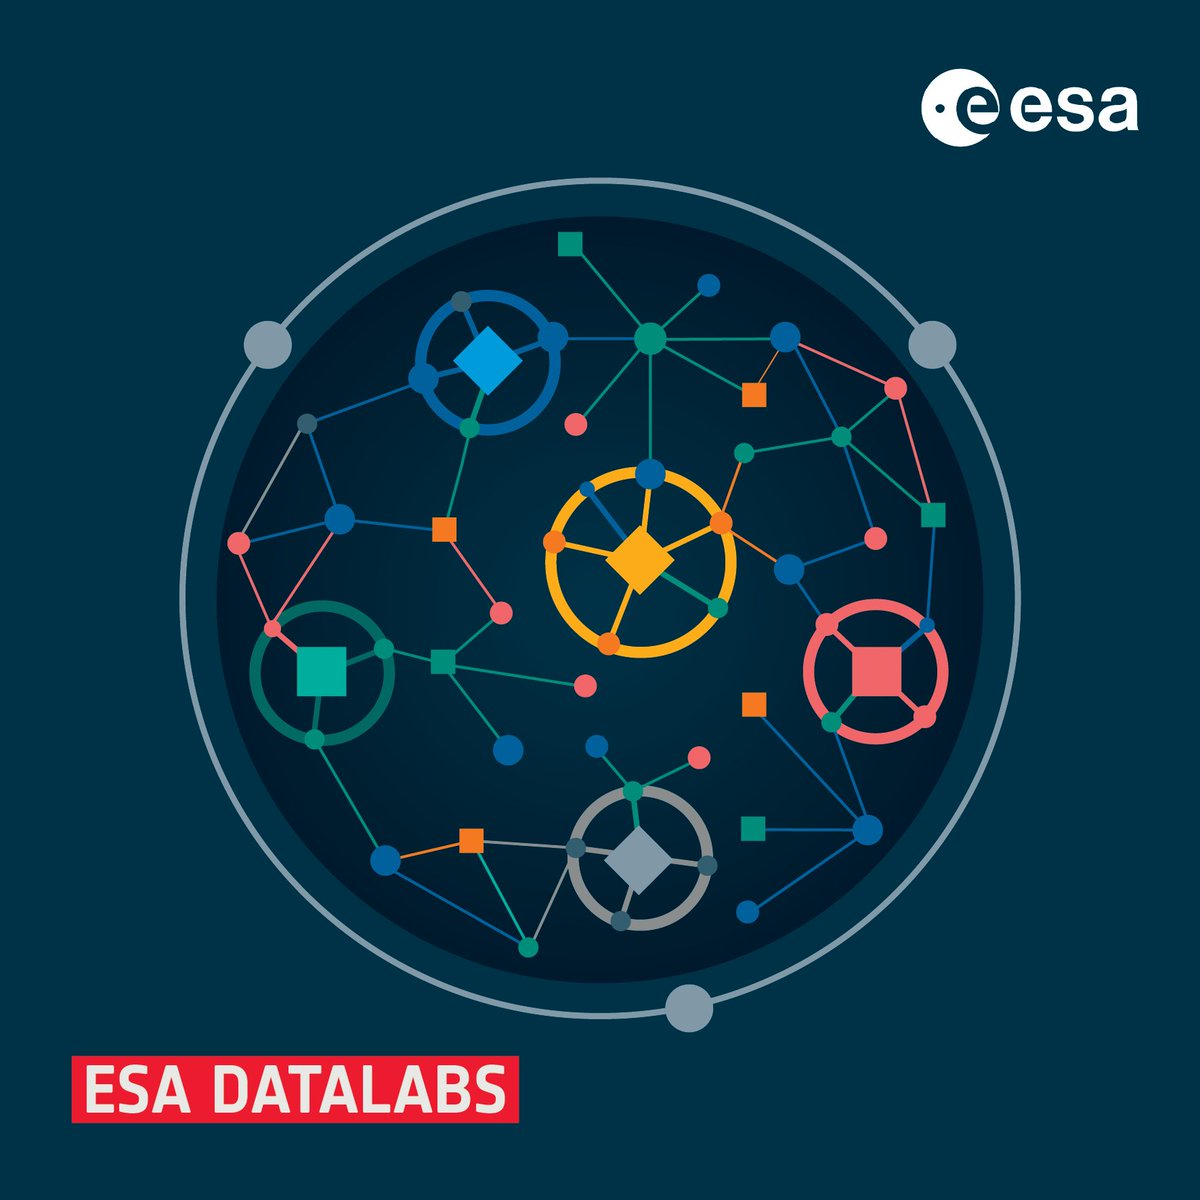 Do you want to have a sneak preview of #ESADatalabs in action? Let's meet at #ADASS2022. We are looking forward to sharing with you what's next in #ESADatalabs #innovation #SaaS #scienceplatform #gpu #ML

adass2022.ca